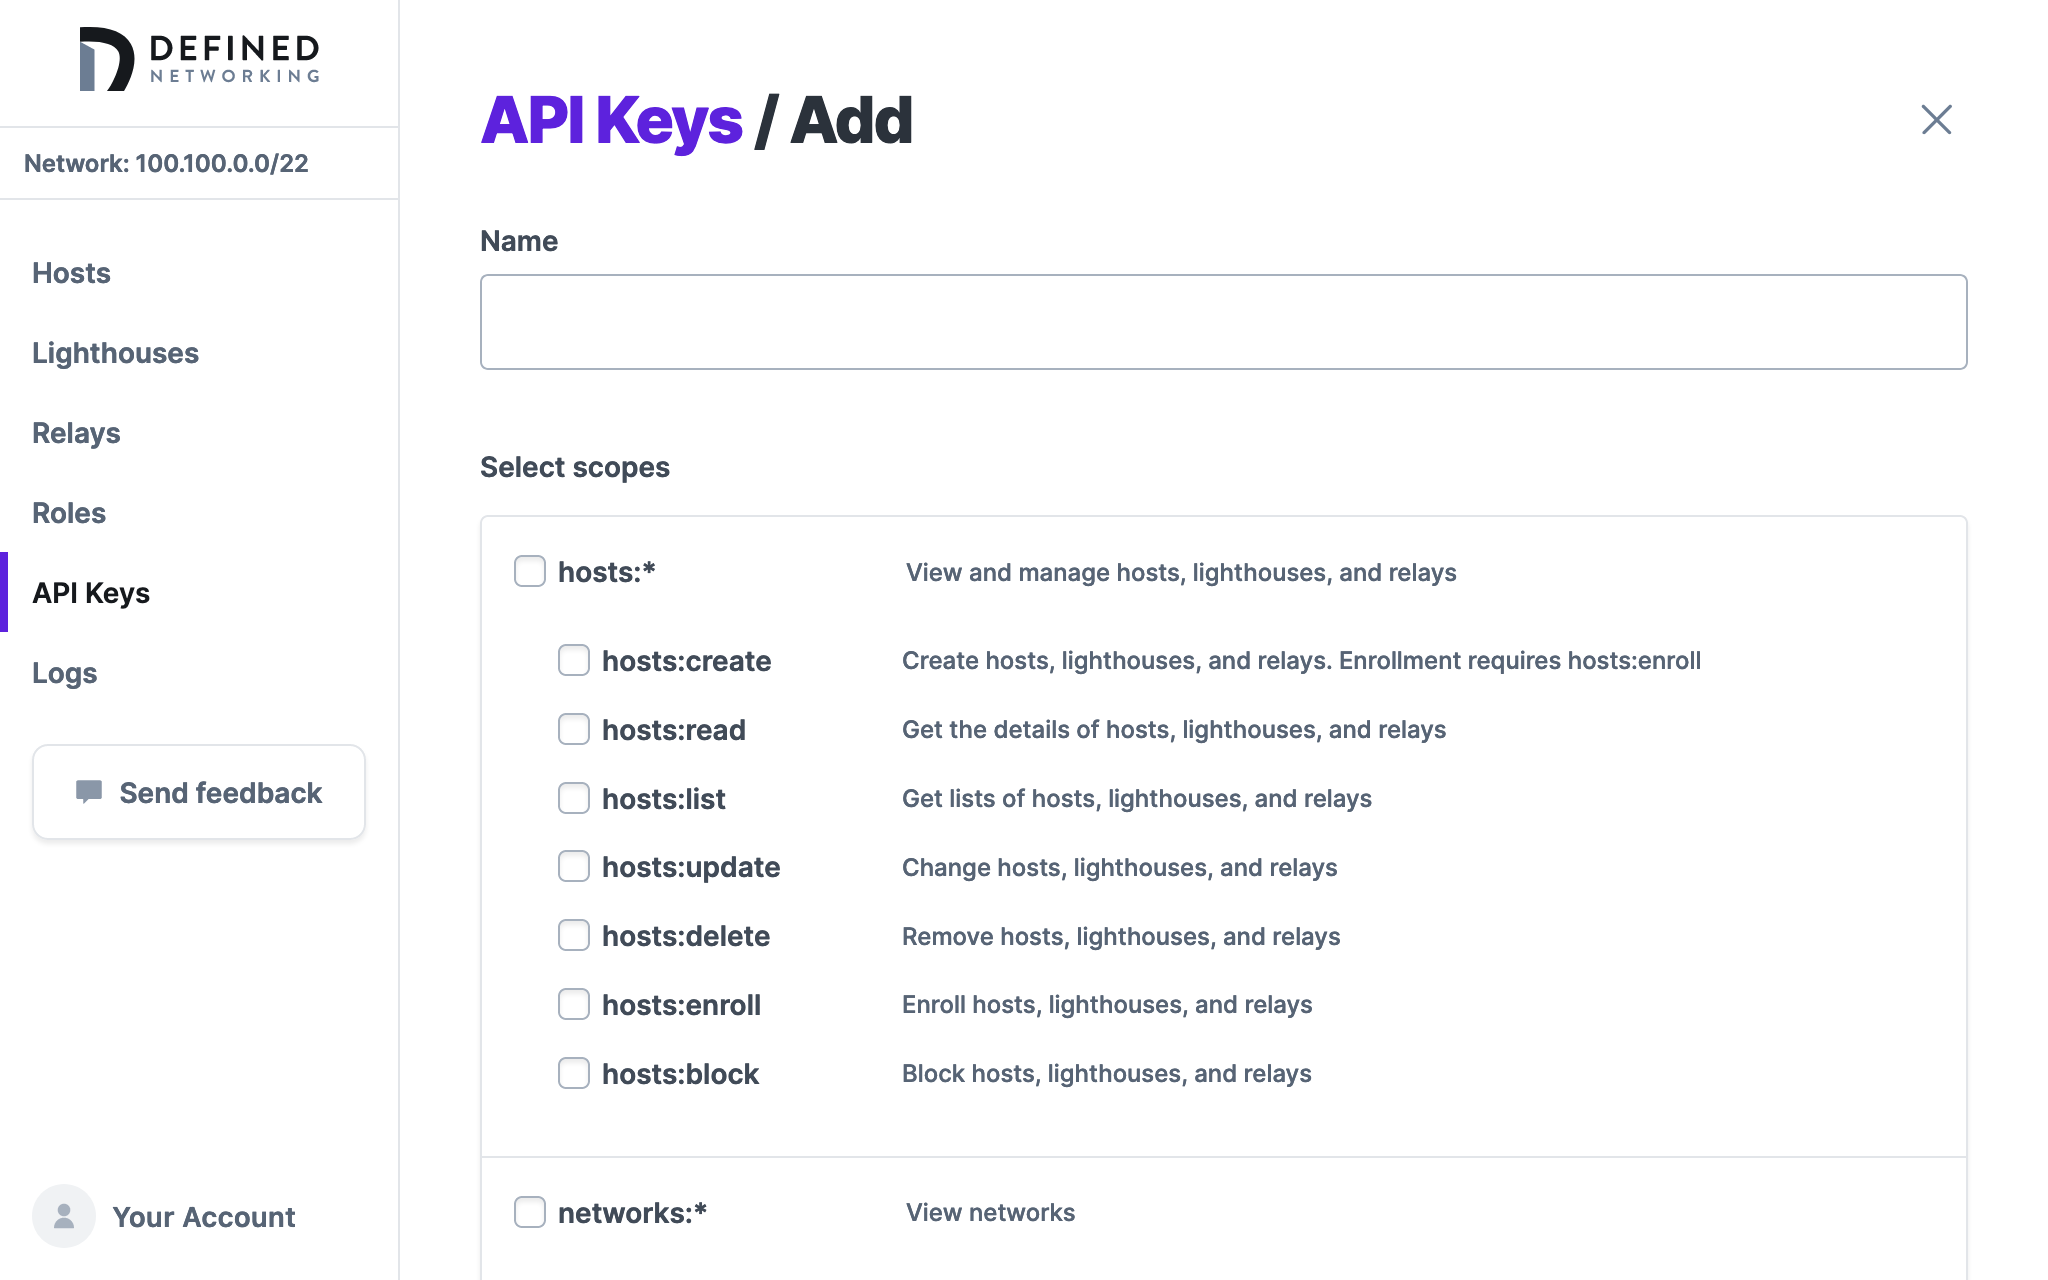 A screenshot of the Defined Networking web admin panel showing the new API key form, with a
field for name, and checkboxes for permission scopes like “hosts:create” and “hosts:read”